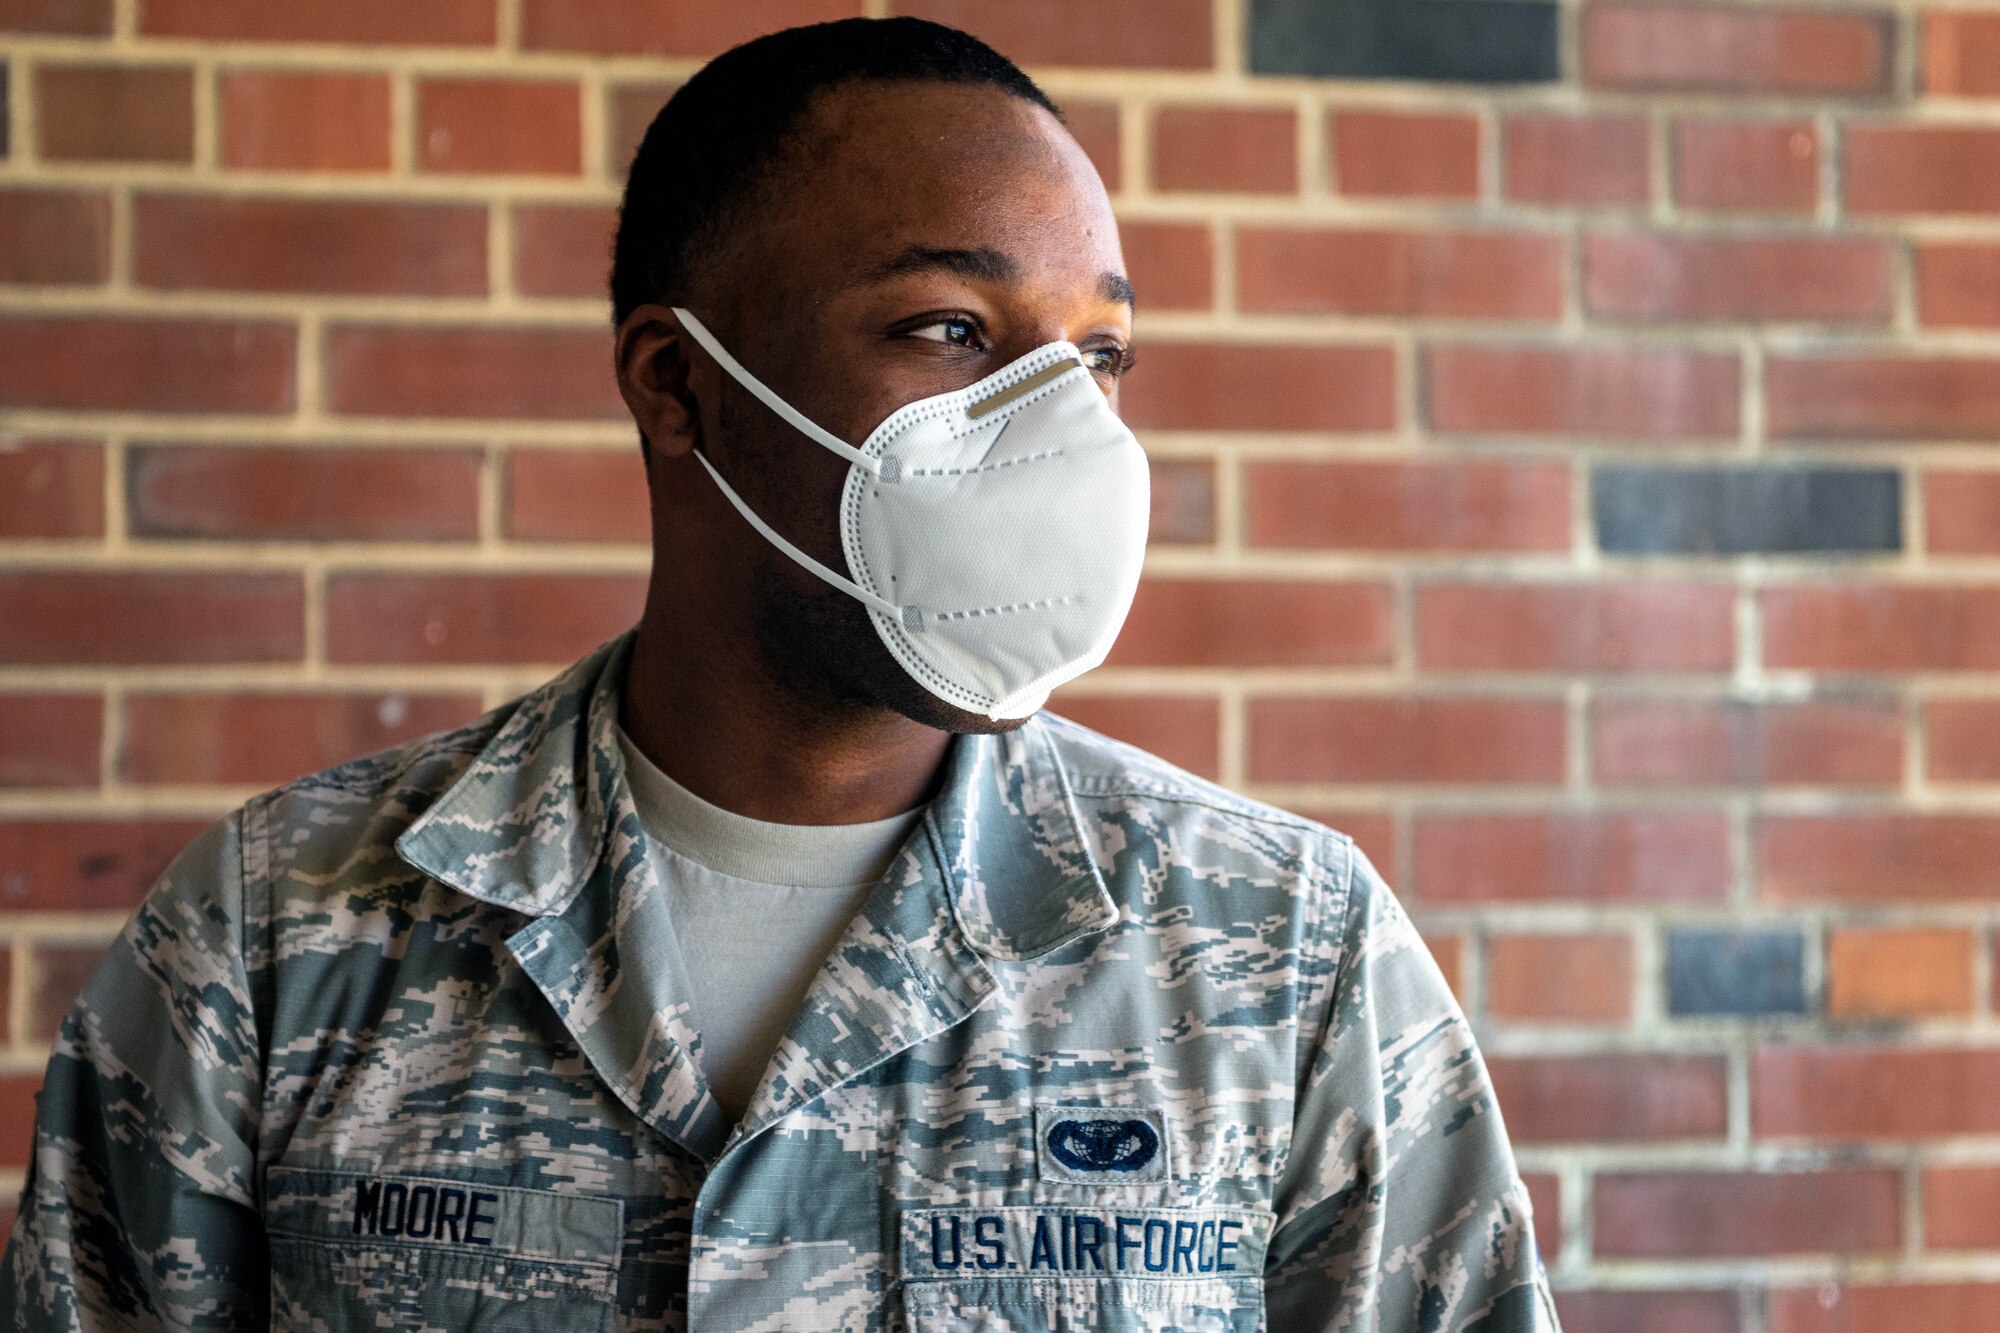 U.S. Air Force Senior Airman Derrick Moore, with the 126th Force Support Squadron, Illinois Air National Guard, watches for patrons at his COVID-19 screening checkpoint at the Shapiro Developmental Center in Kankakee, Ill., April 20, 2020.